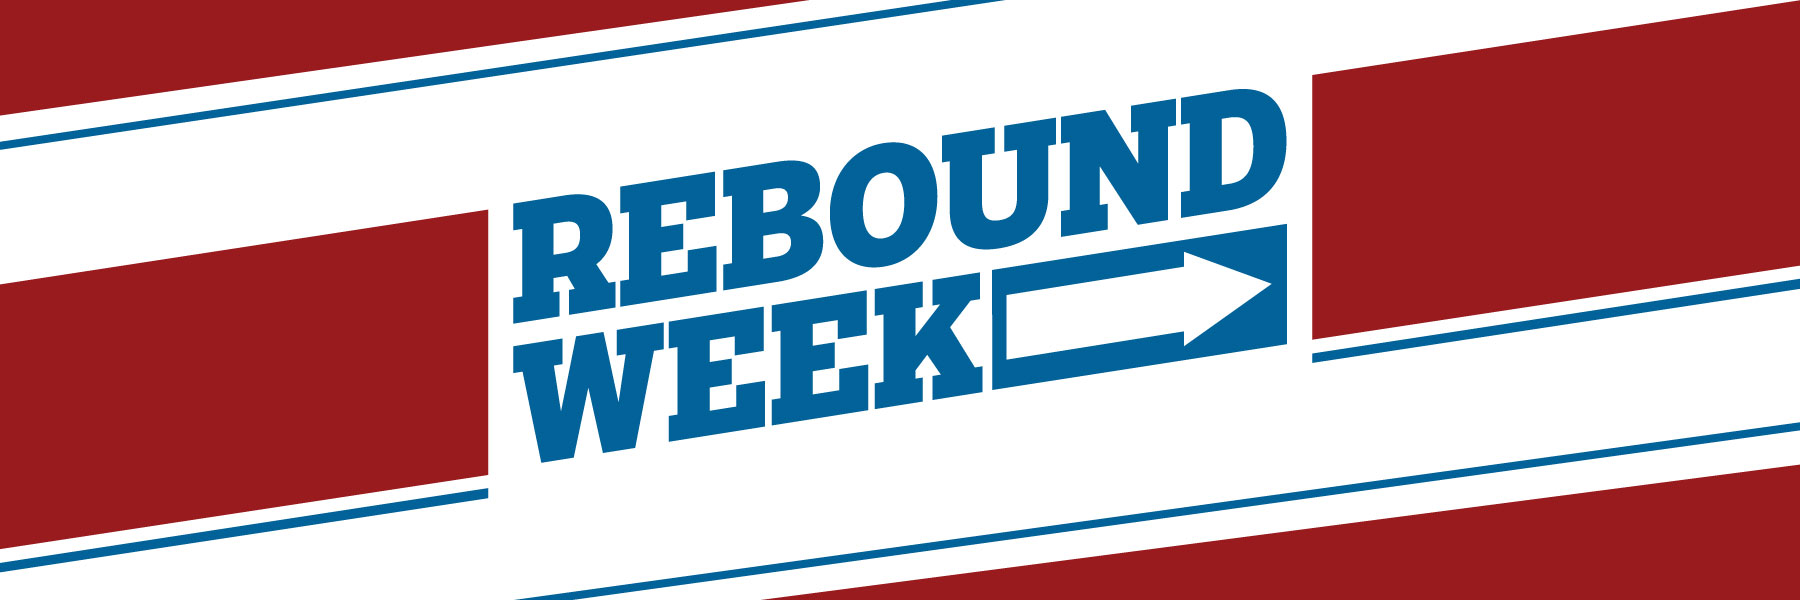 Crimson lines with blue text saying Rebound Week followed by a white arrow